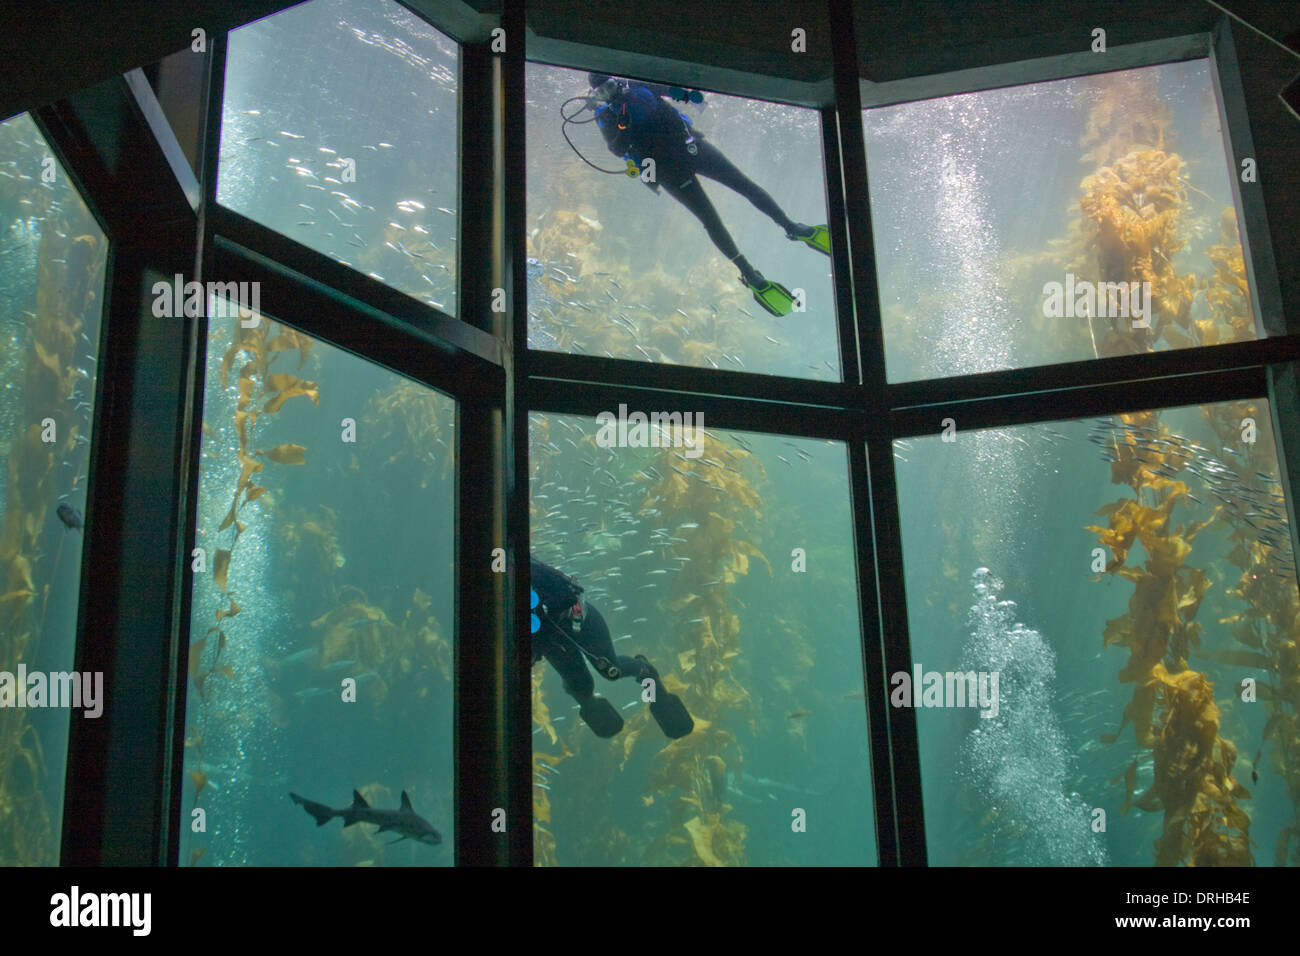 Divers in a tank at the Monterey Bay Aquarium Stock Photo